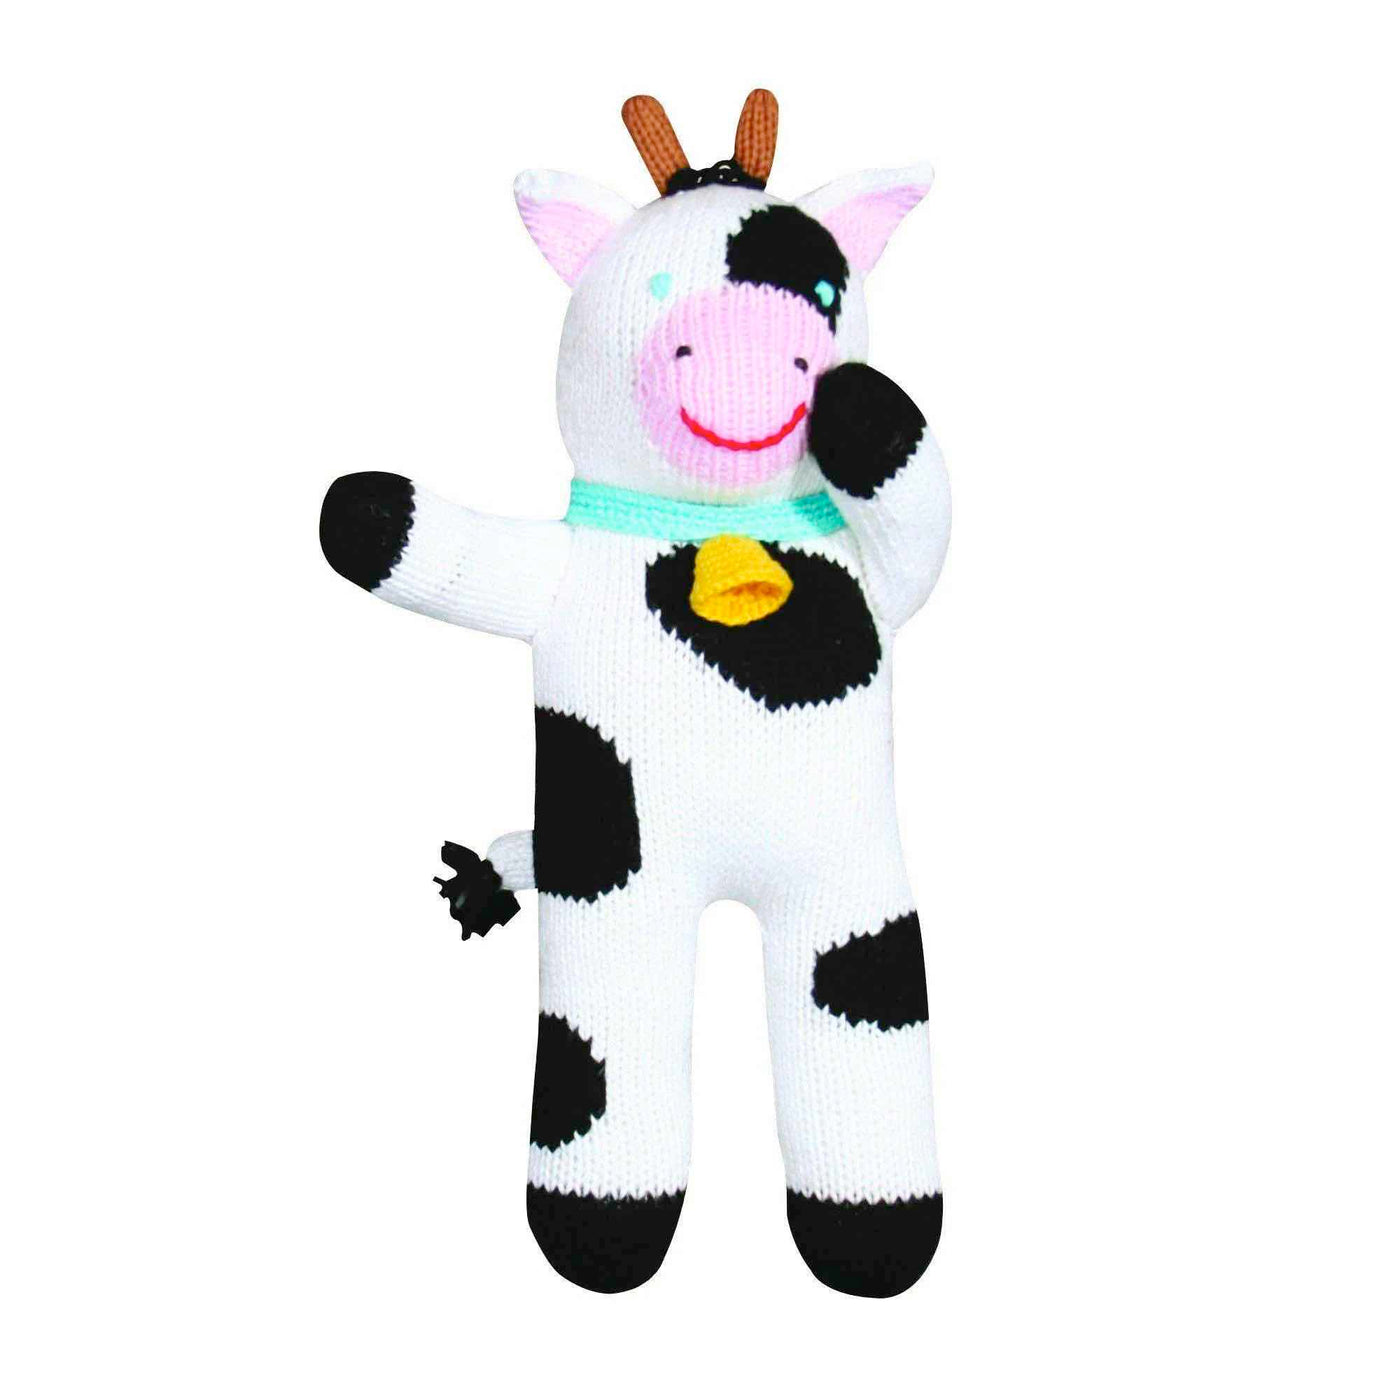 Cowleen The Cow Knit Rattle